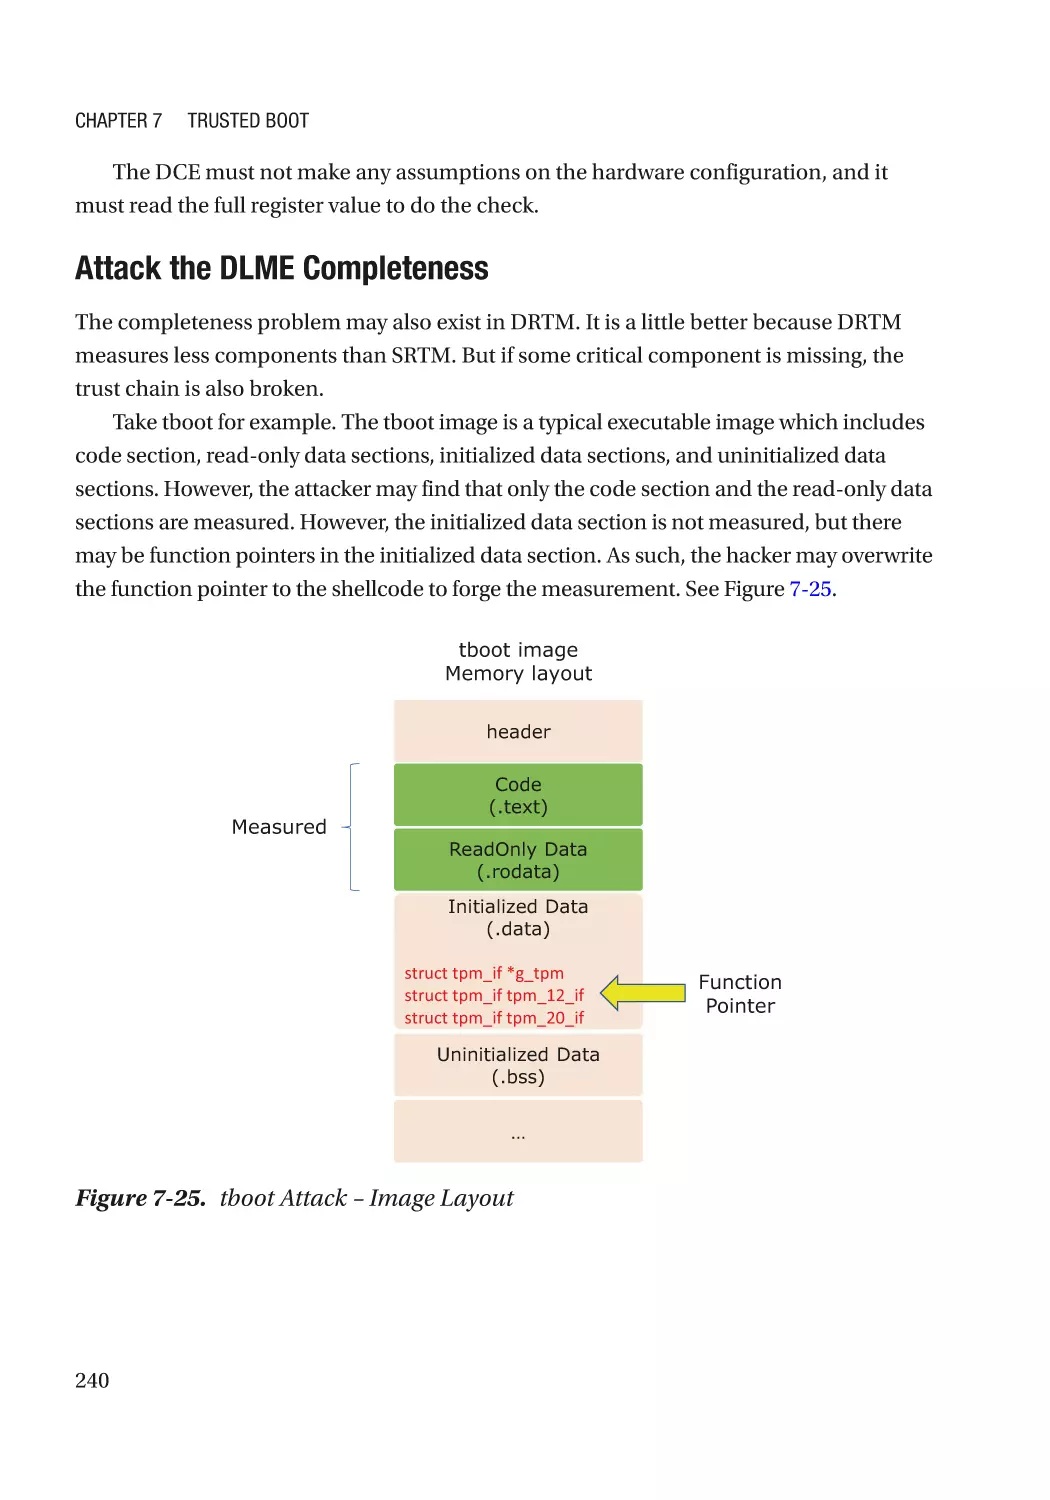 Attack the DLME Completeness